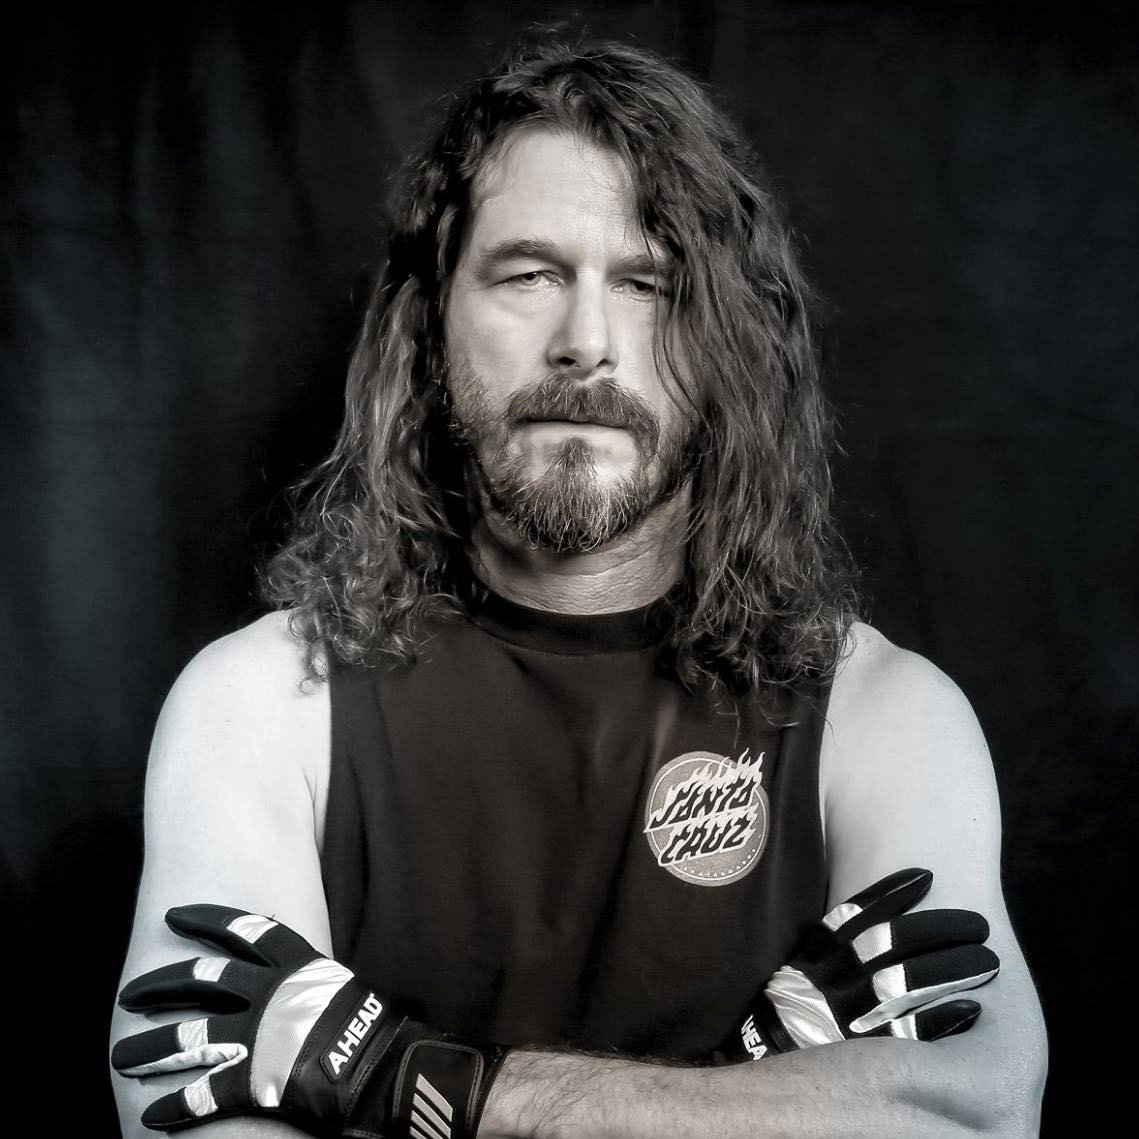 This is the OFFICIAL Paul Bostaph Twitter Follow me on tour with Slayer